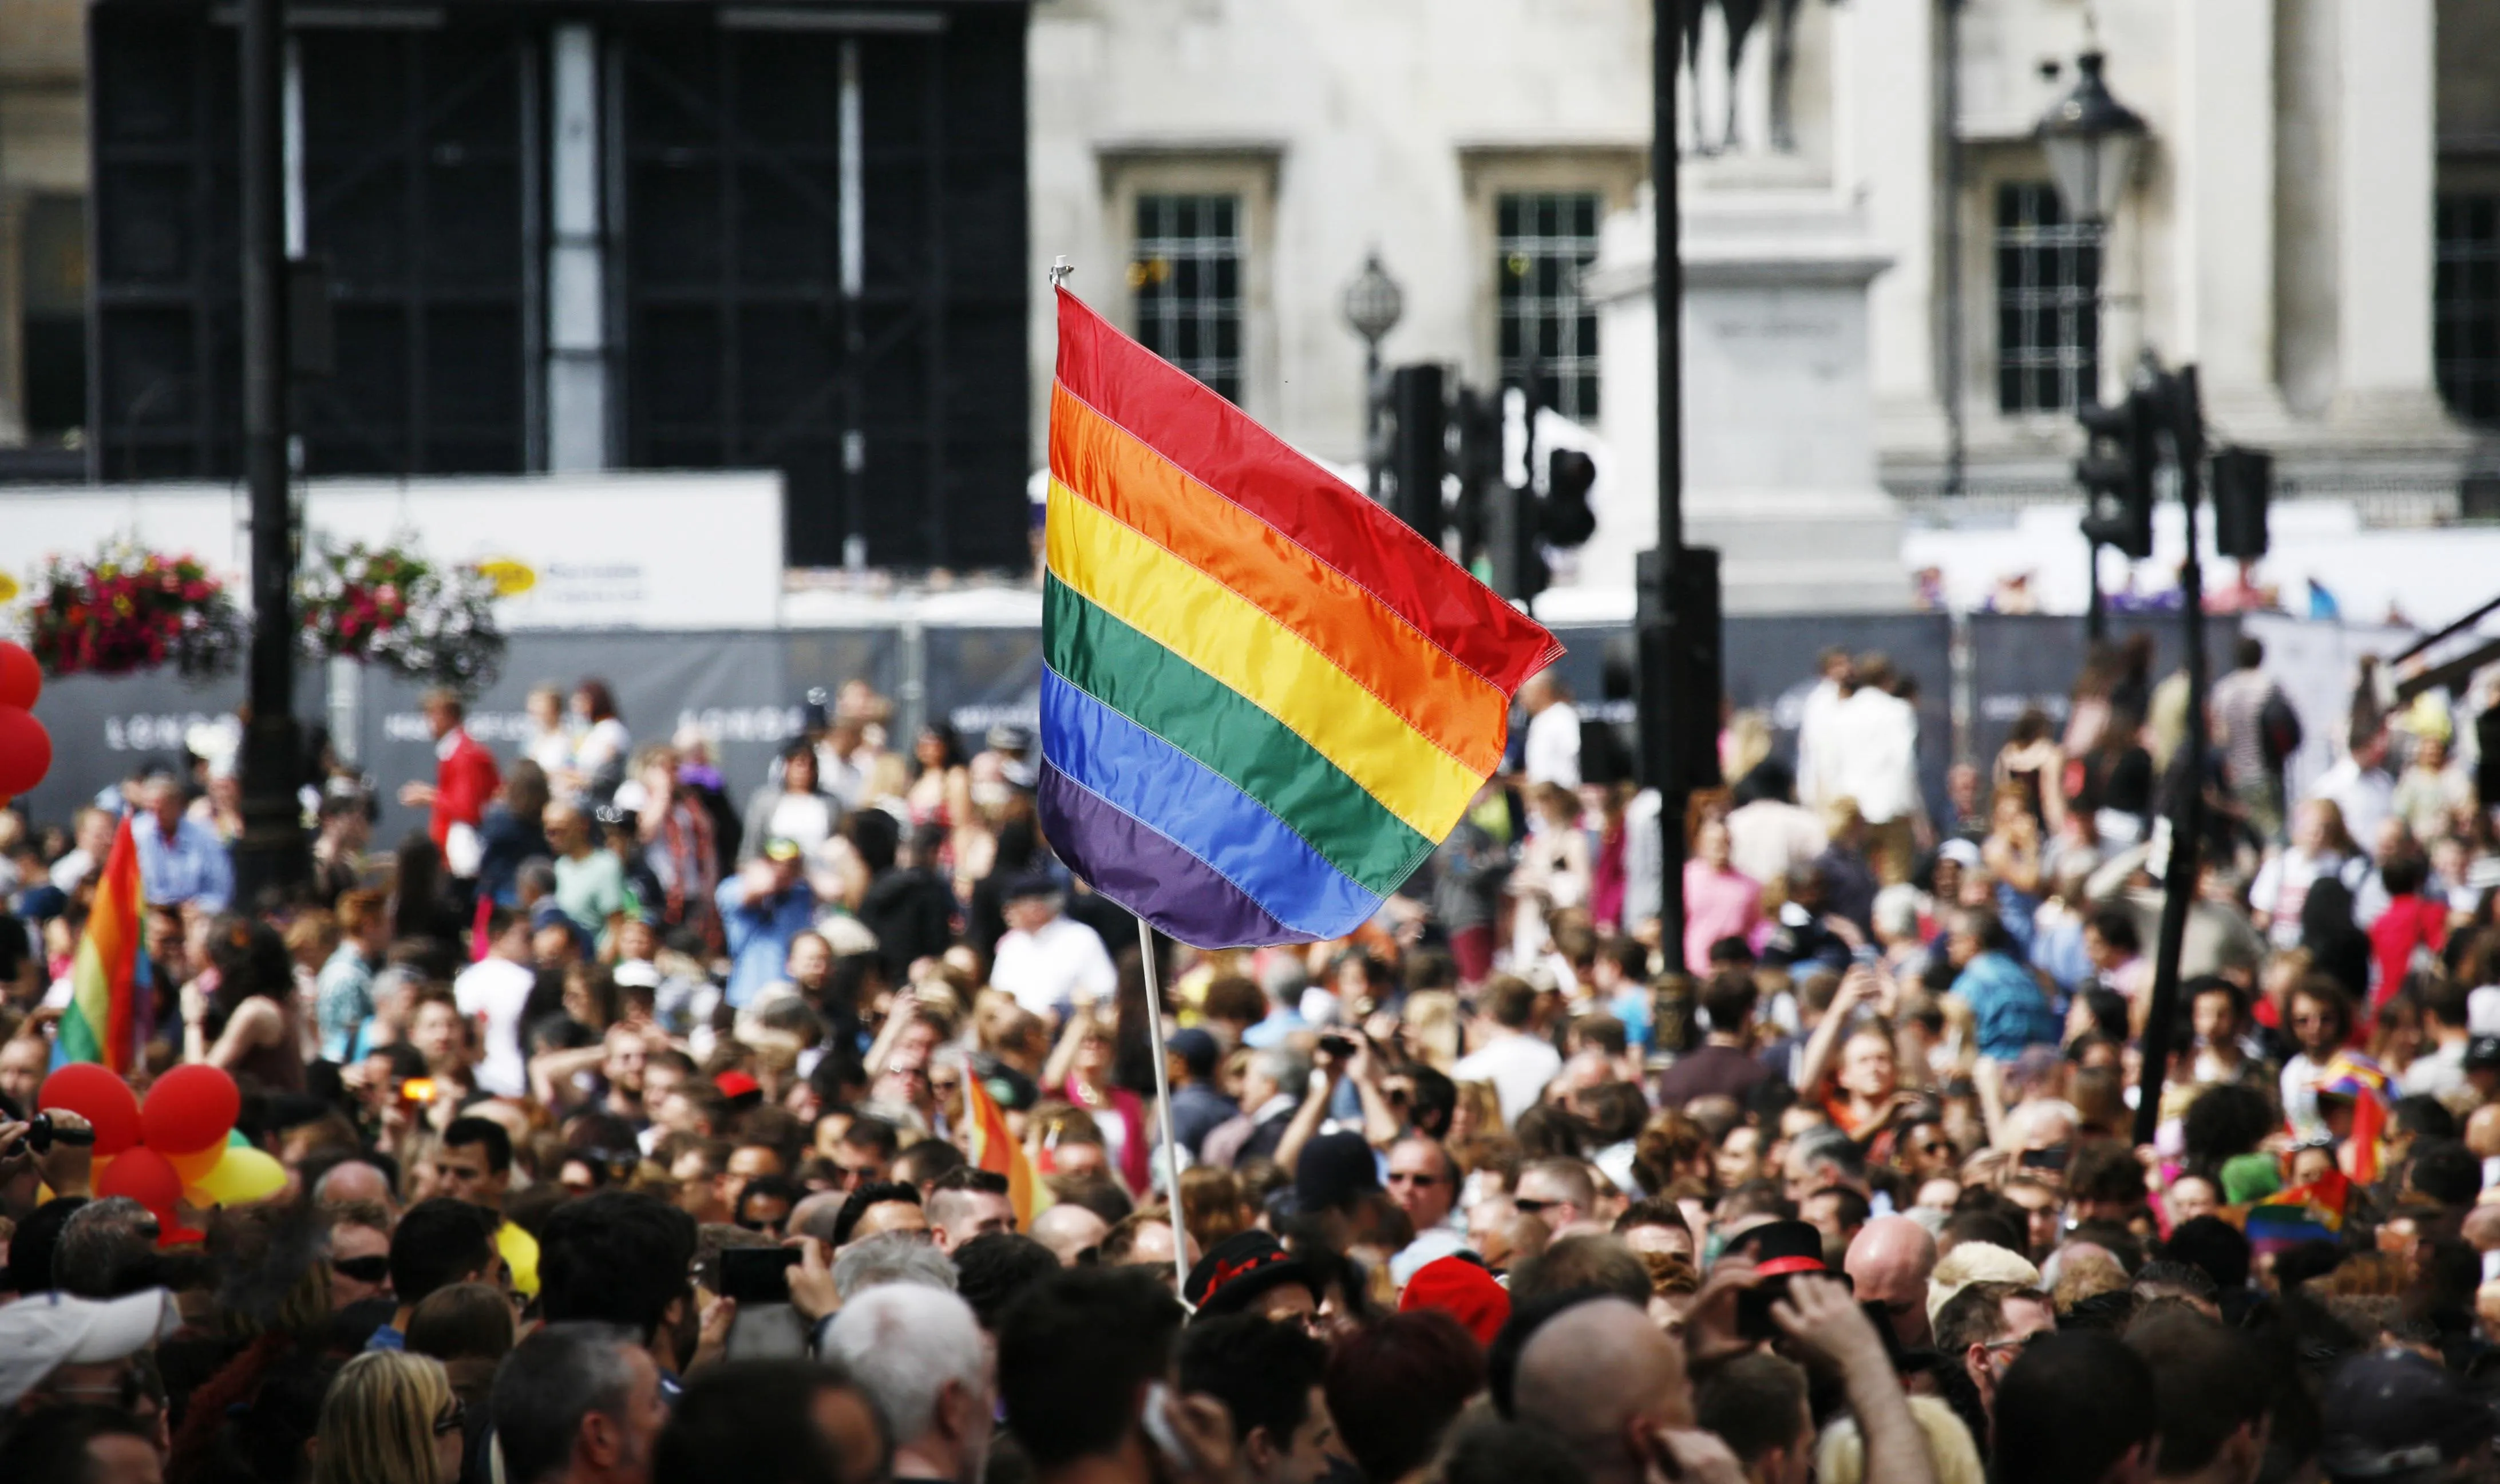 Rainbow flag waved in the crowd during London Pride.